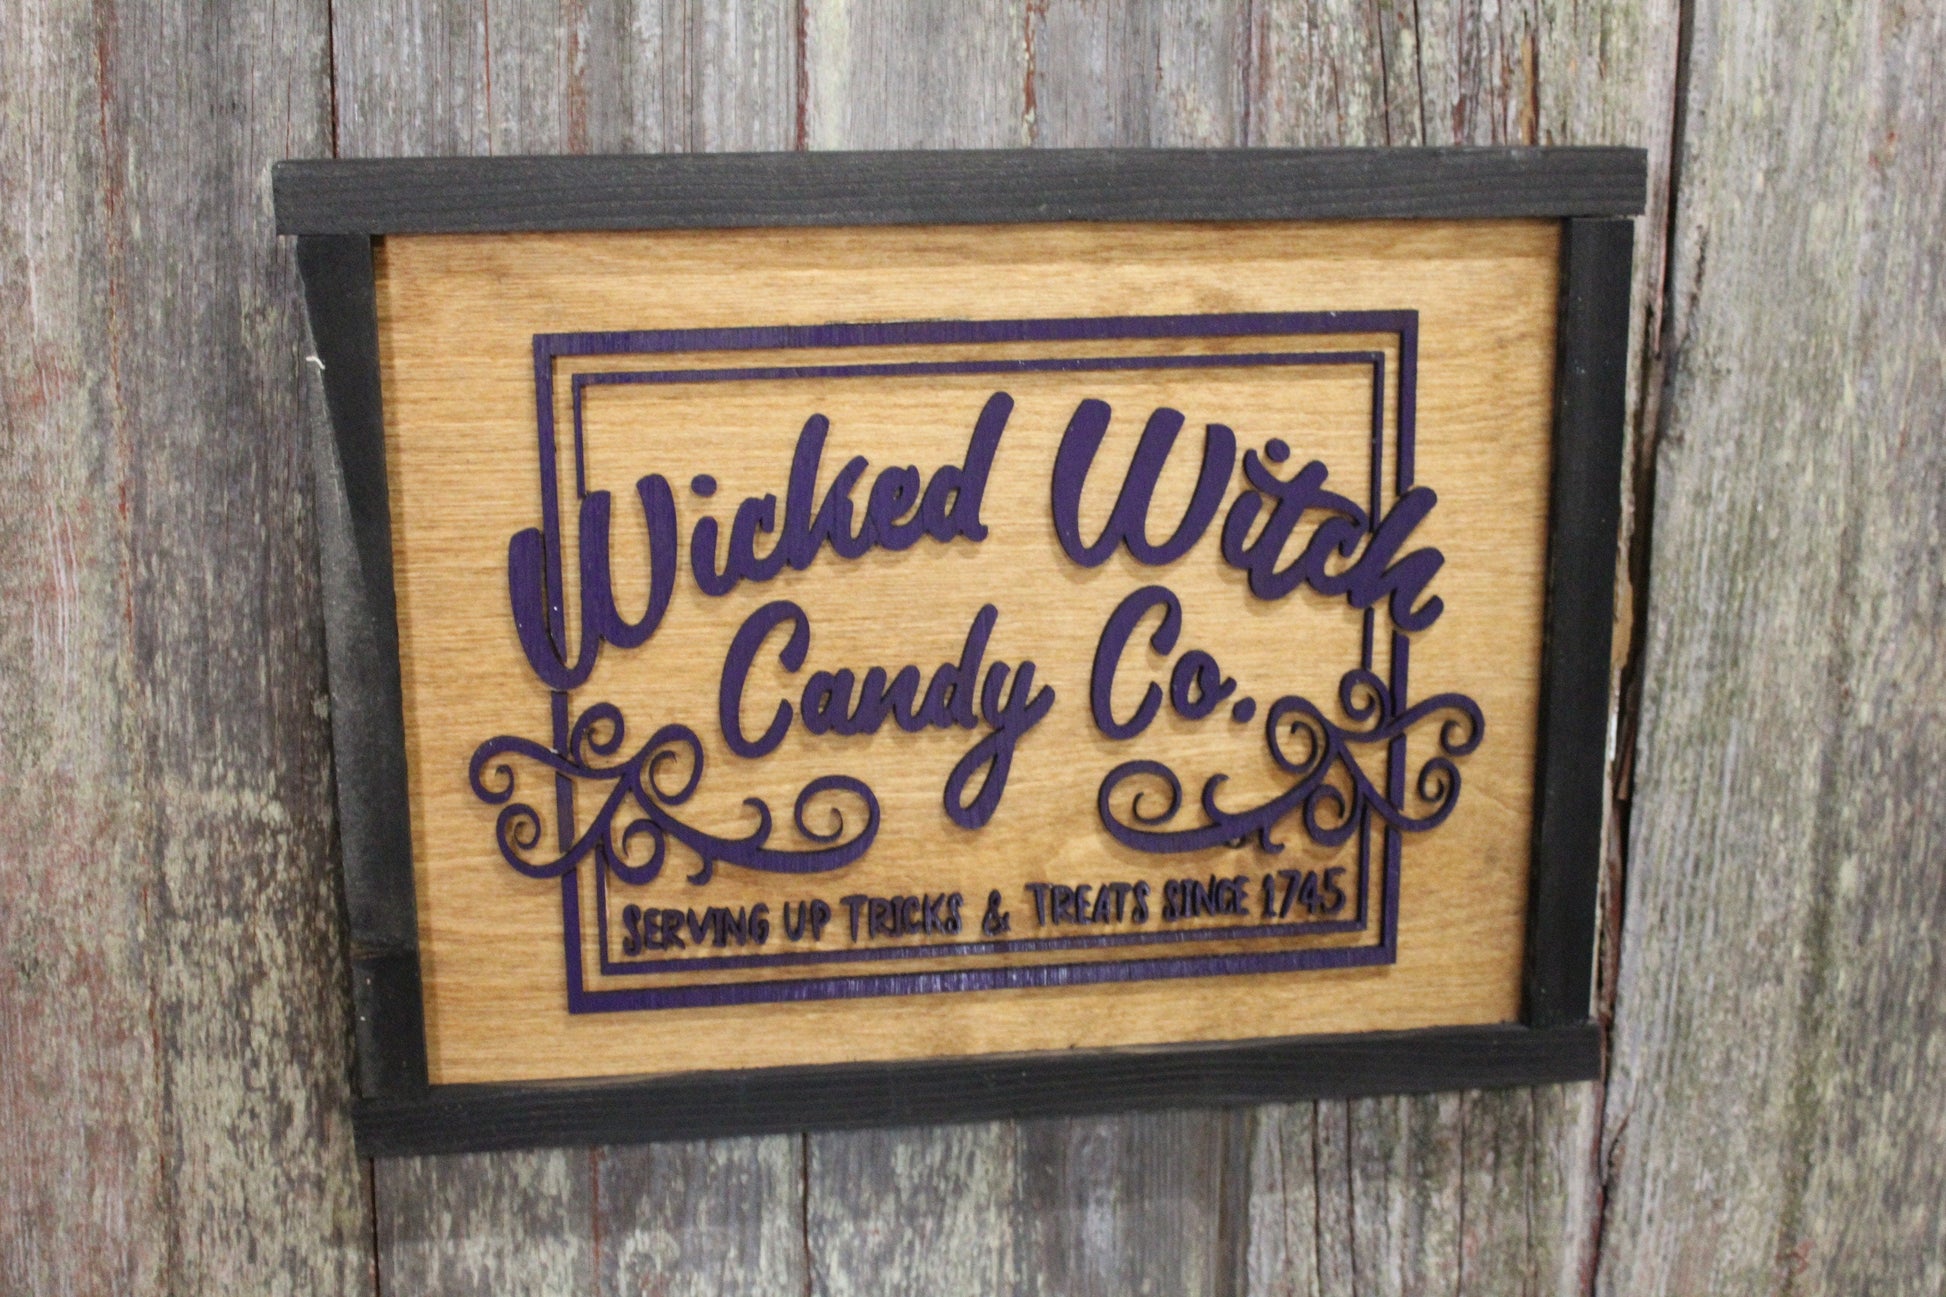 Wicked Witch Candy Company Wood Sign Serving Up Tricks and Treats Halloween Scary 3D Raised Text Country Farmhouse Cabin Decor Fall